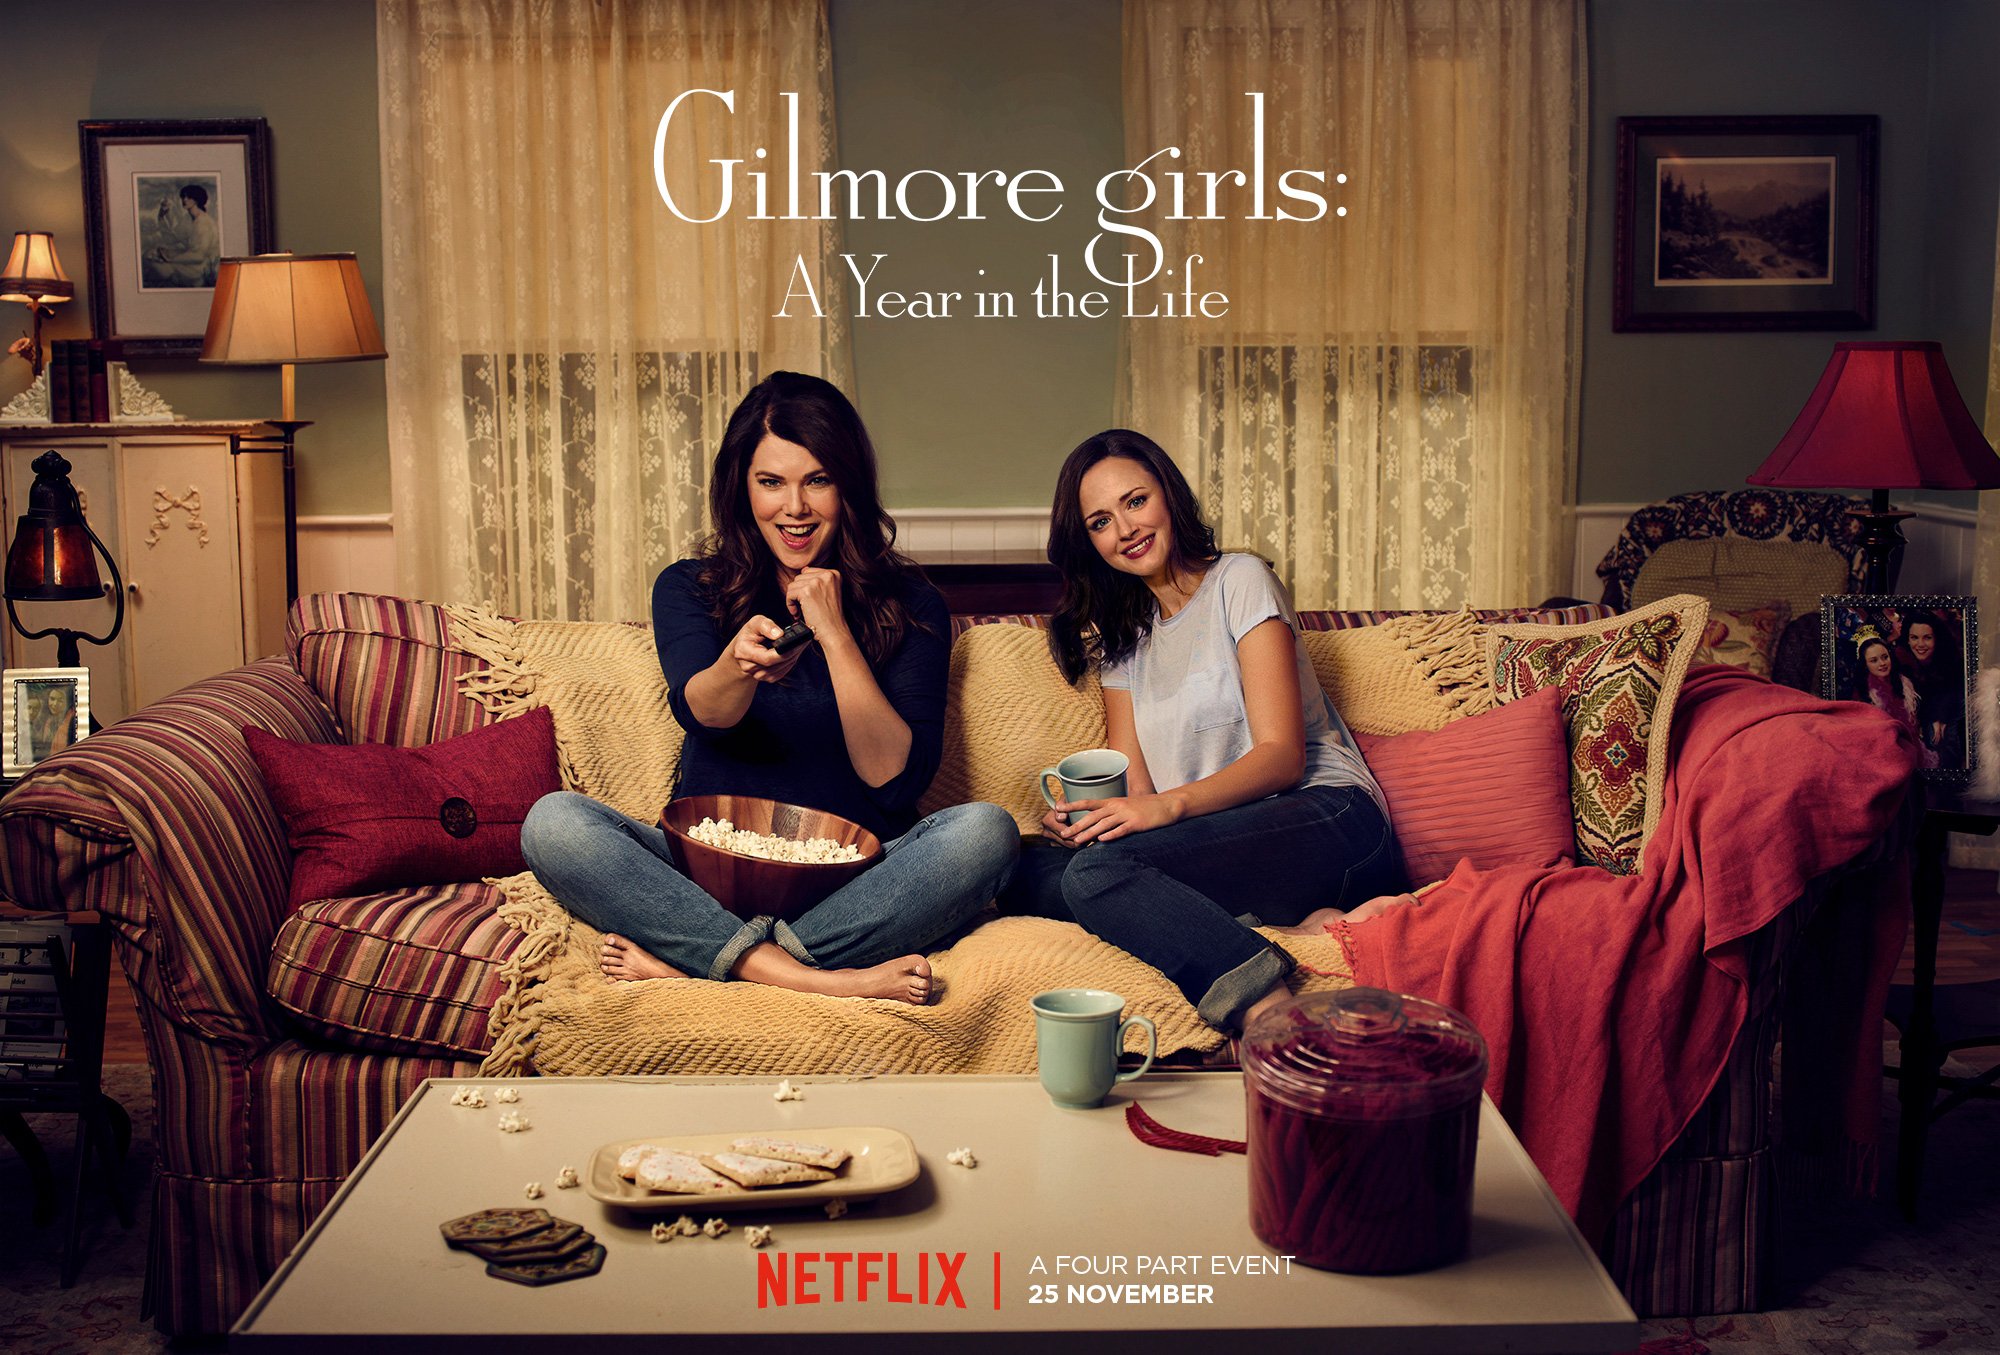 Lauren Graham and Alexis Bledel sit on a couch together in a promotional poster for 'Gilmore Girls; A Year in the Life'